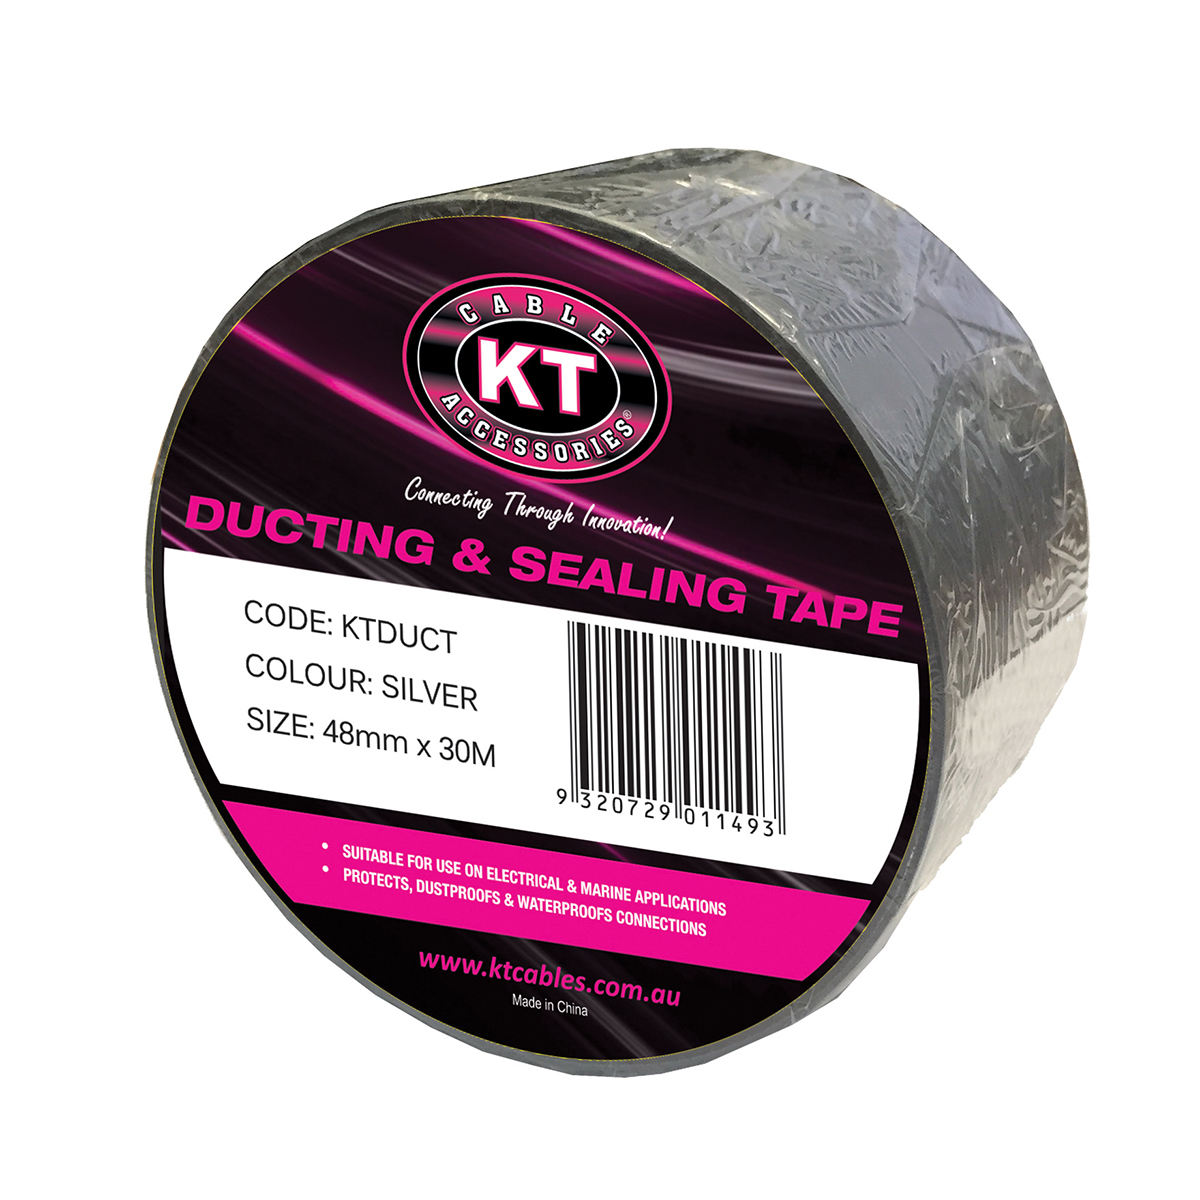 Ducting & Sealing Tape, Silver, 48mm x 30M - KT Cables